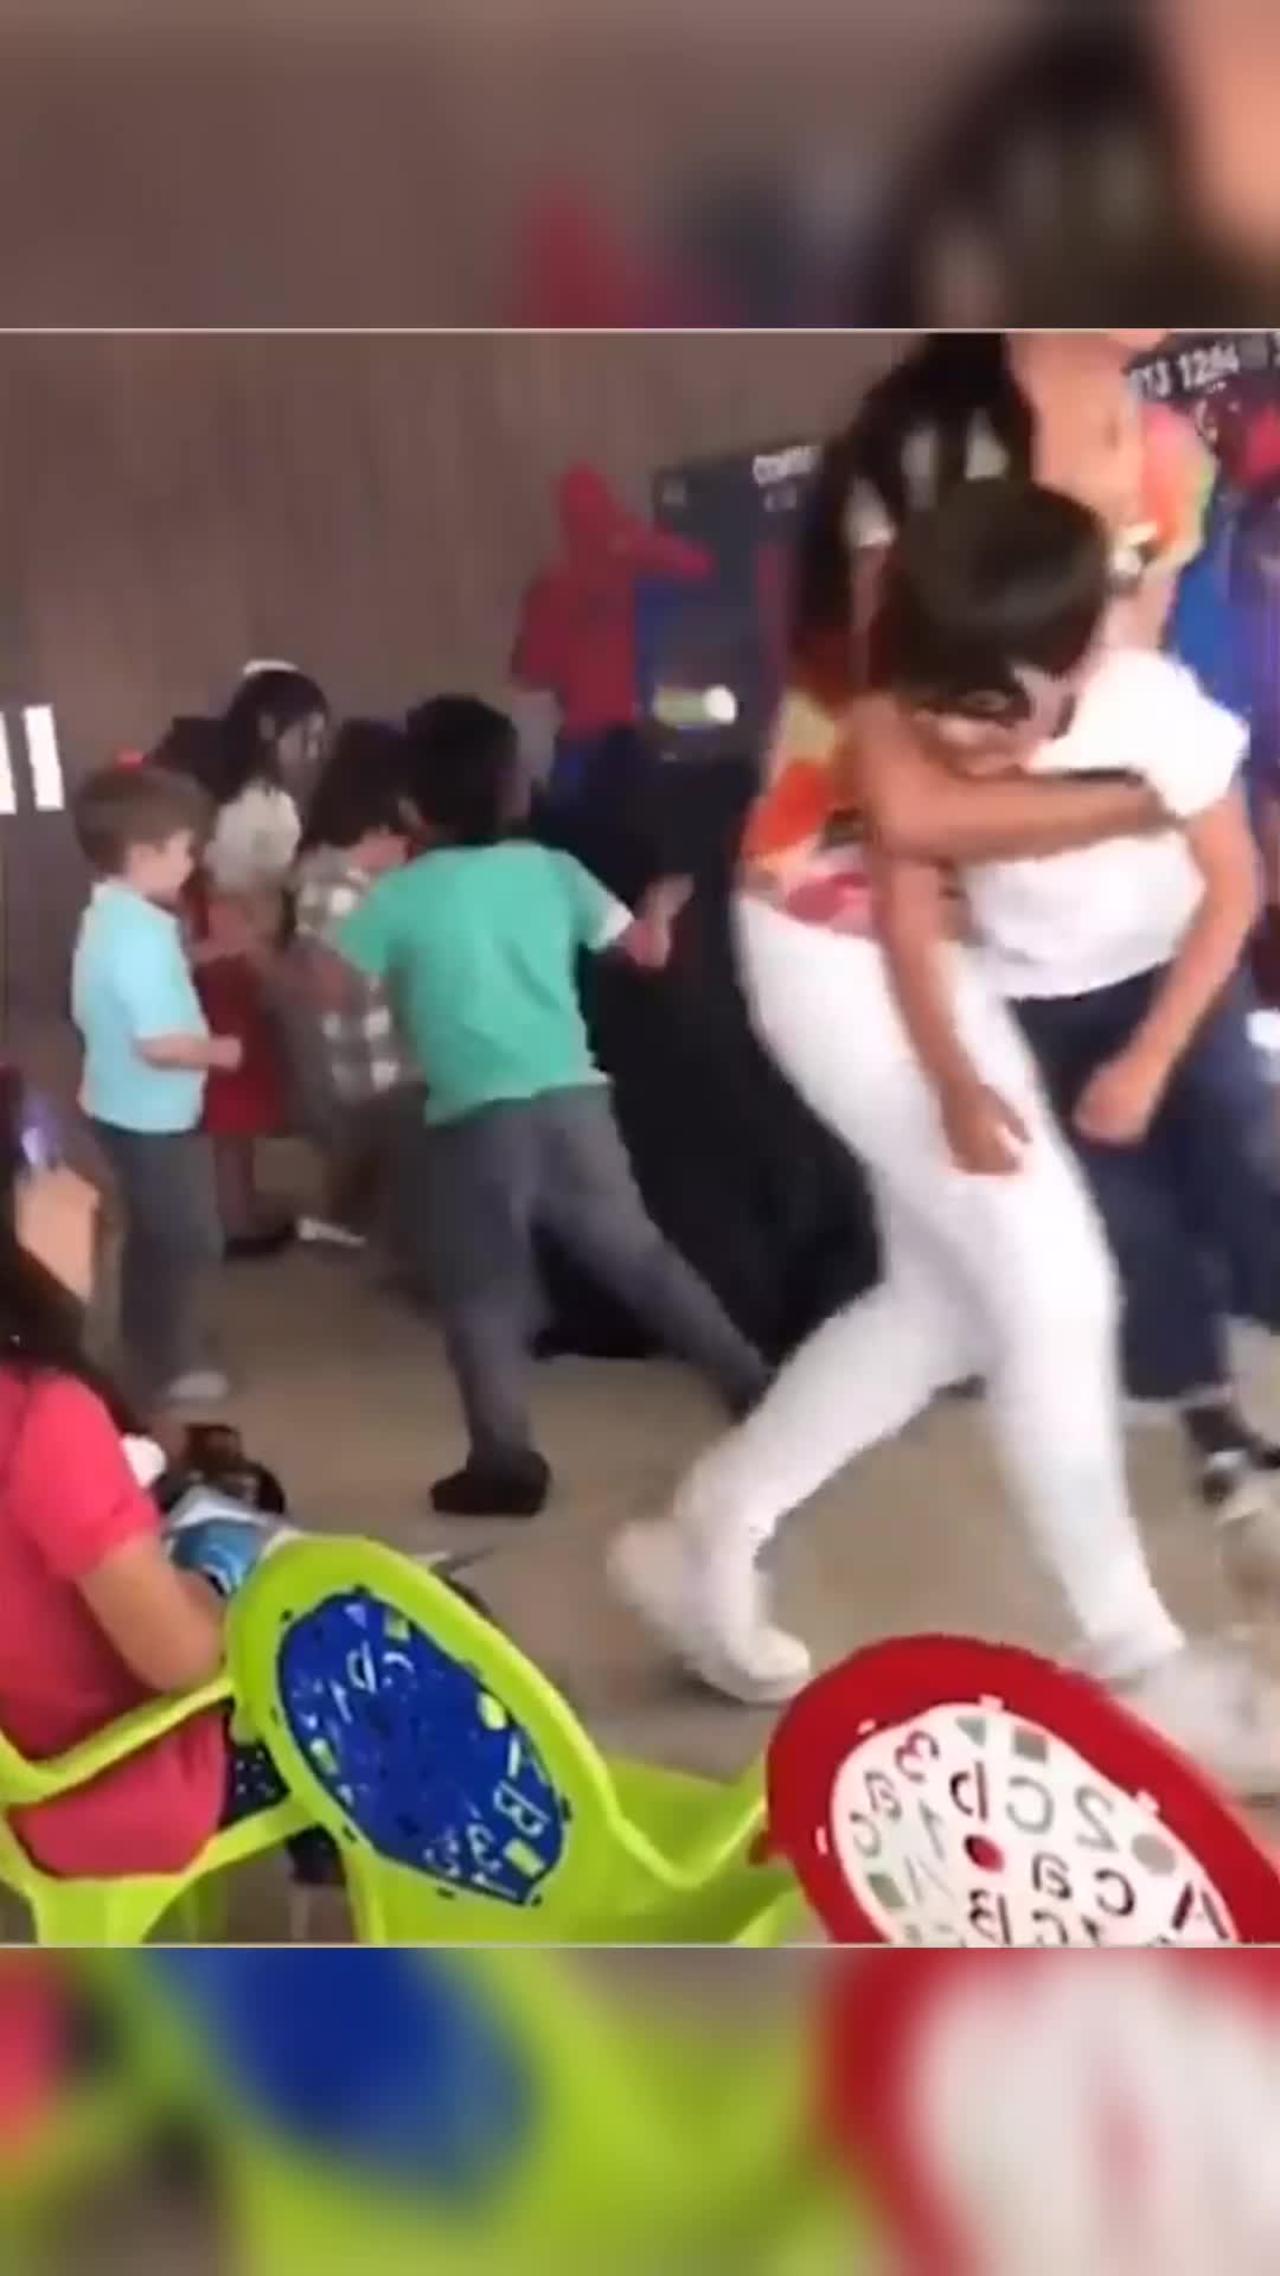 Kid jumps into a Fight to save his Favourite Super Hero. Too funny